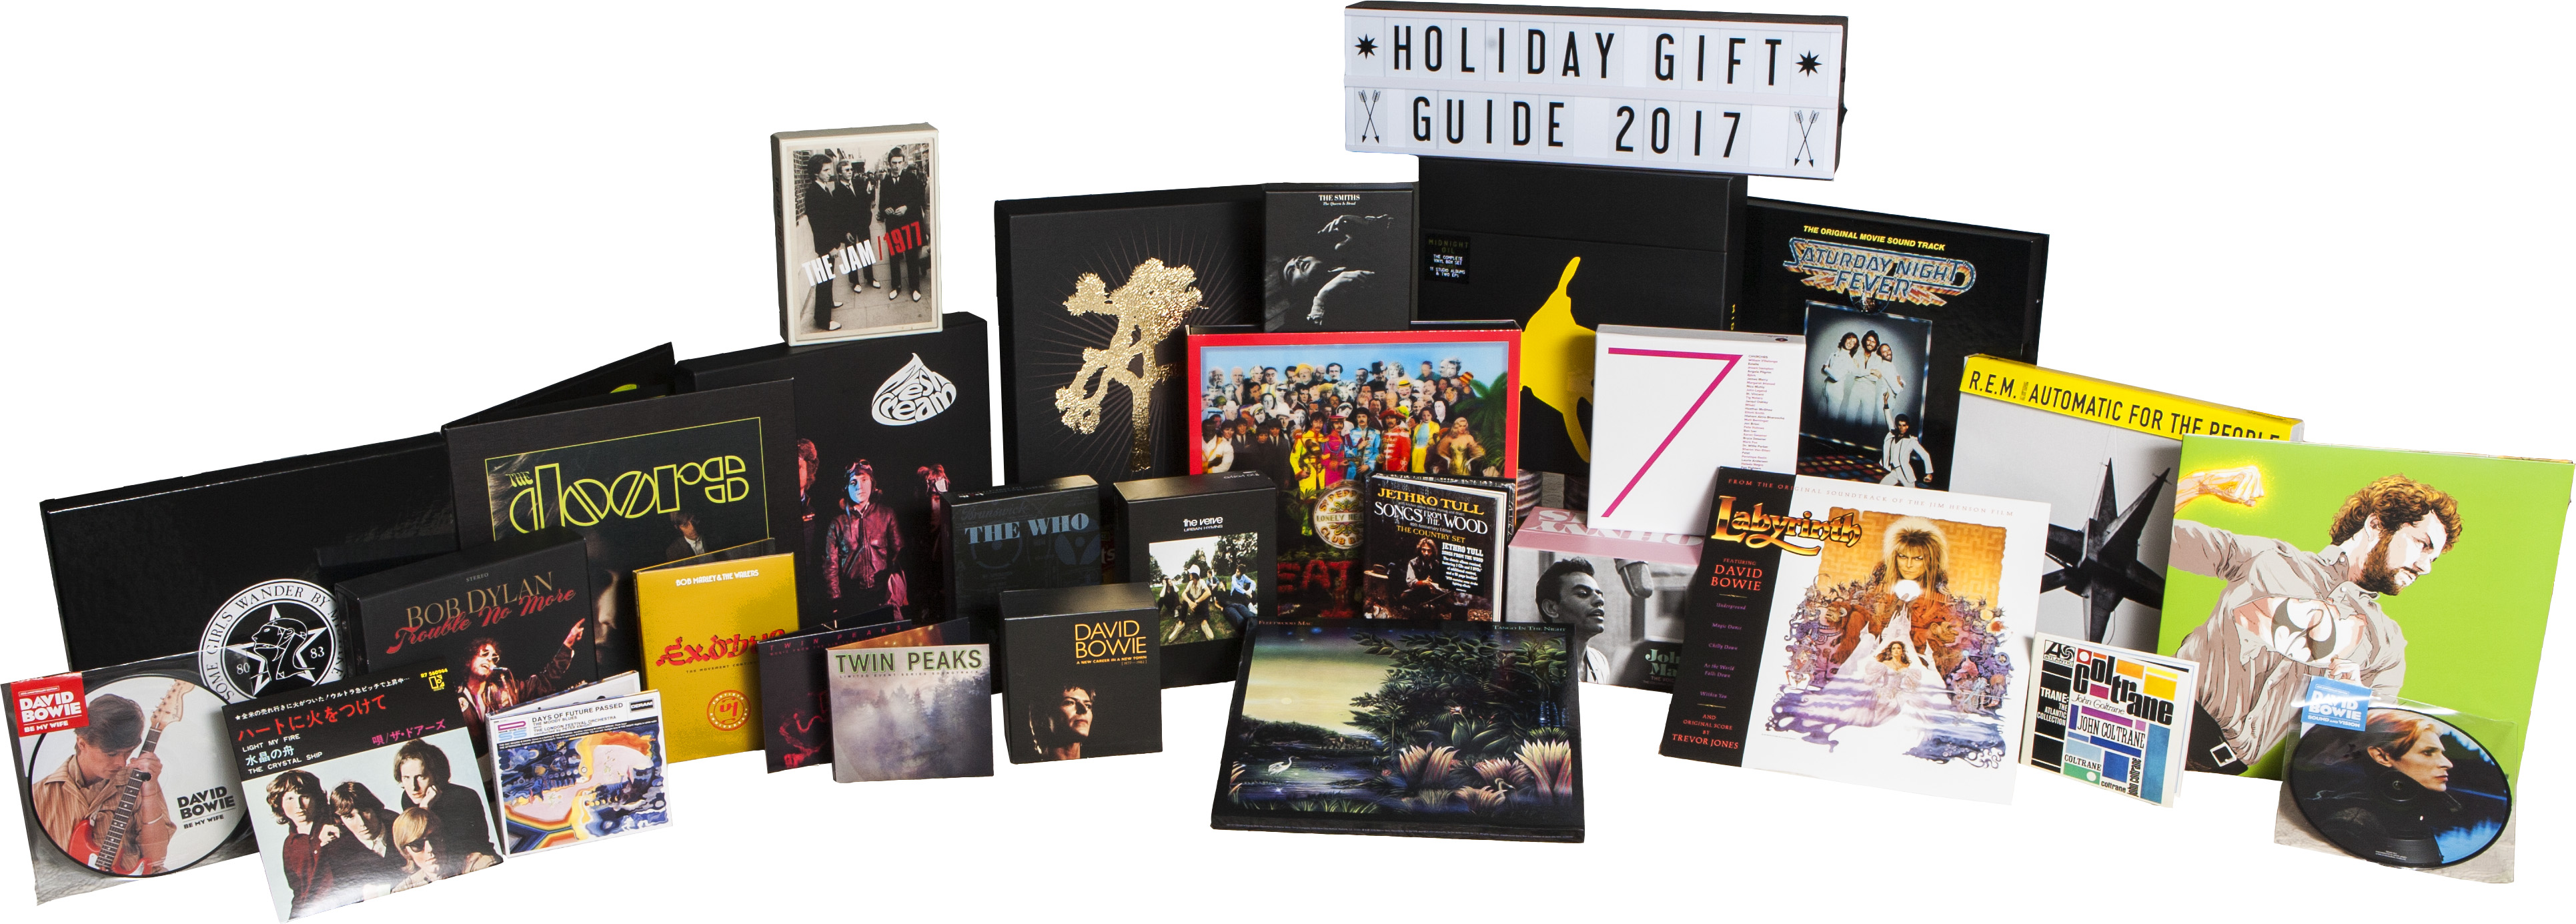 Under the Radar's Holiday Gift Guide 2017 Part 1: Music Box Sets